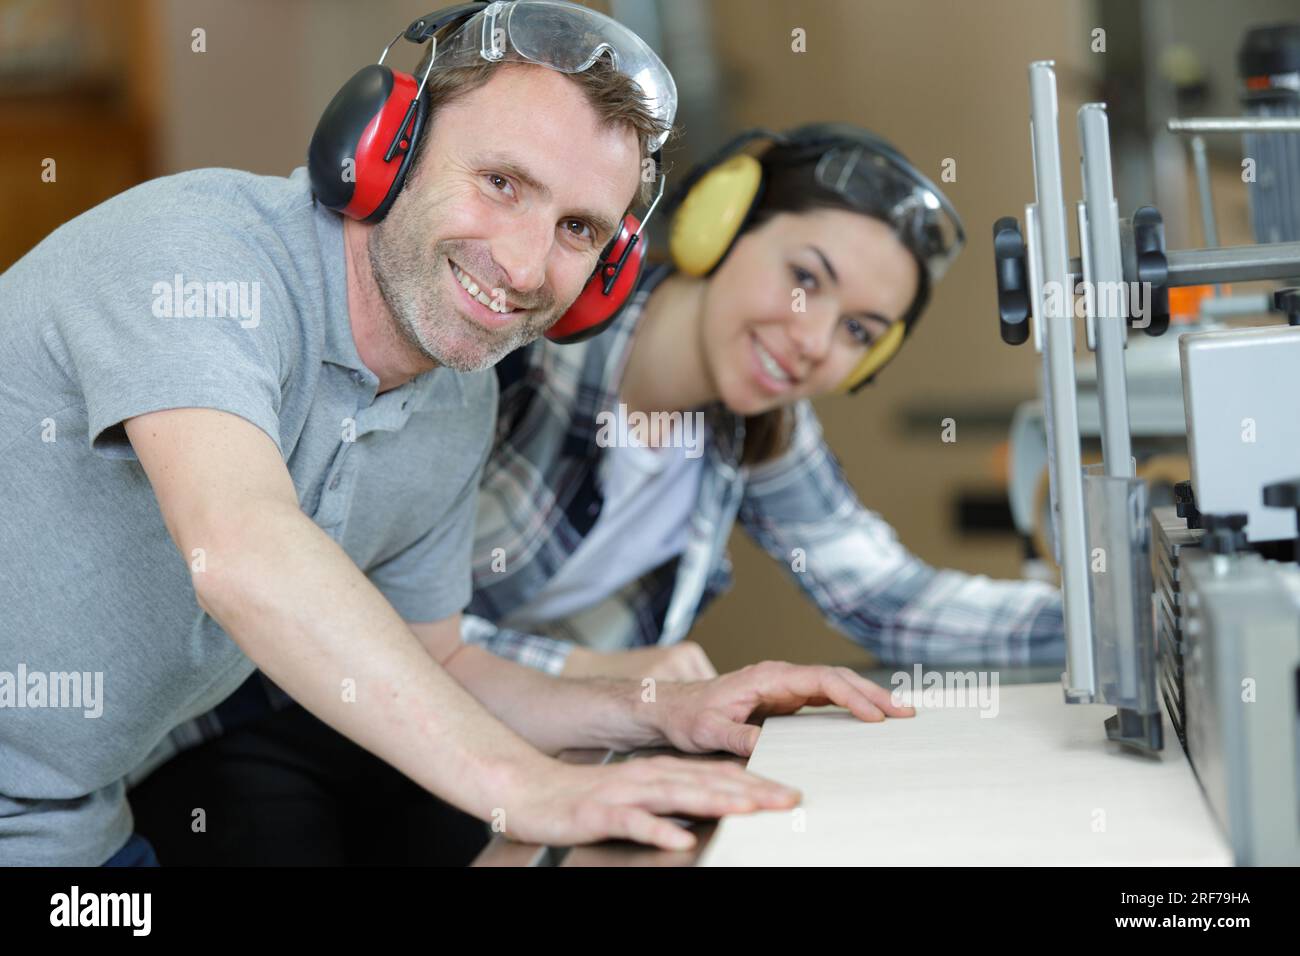 man and woman working in factory wearing ear-defenders Stock Photo